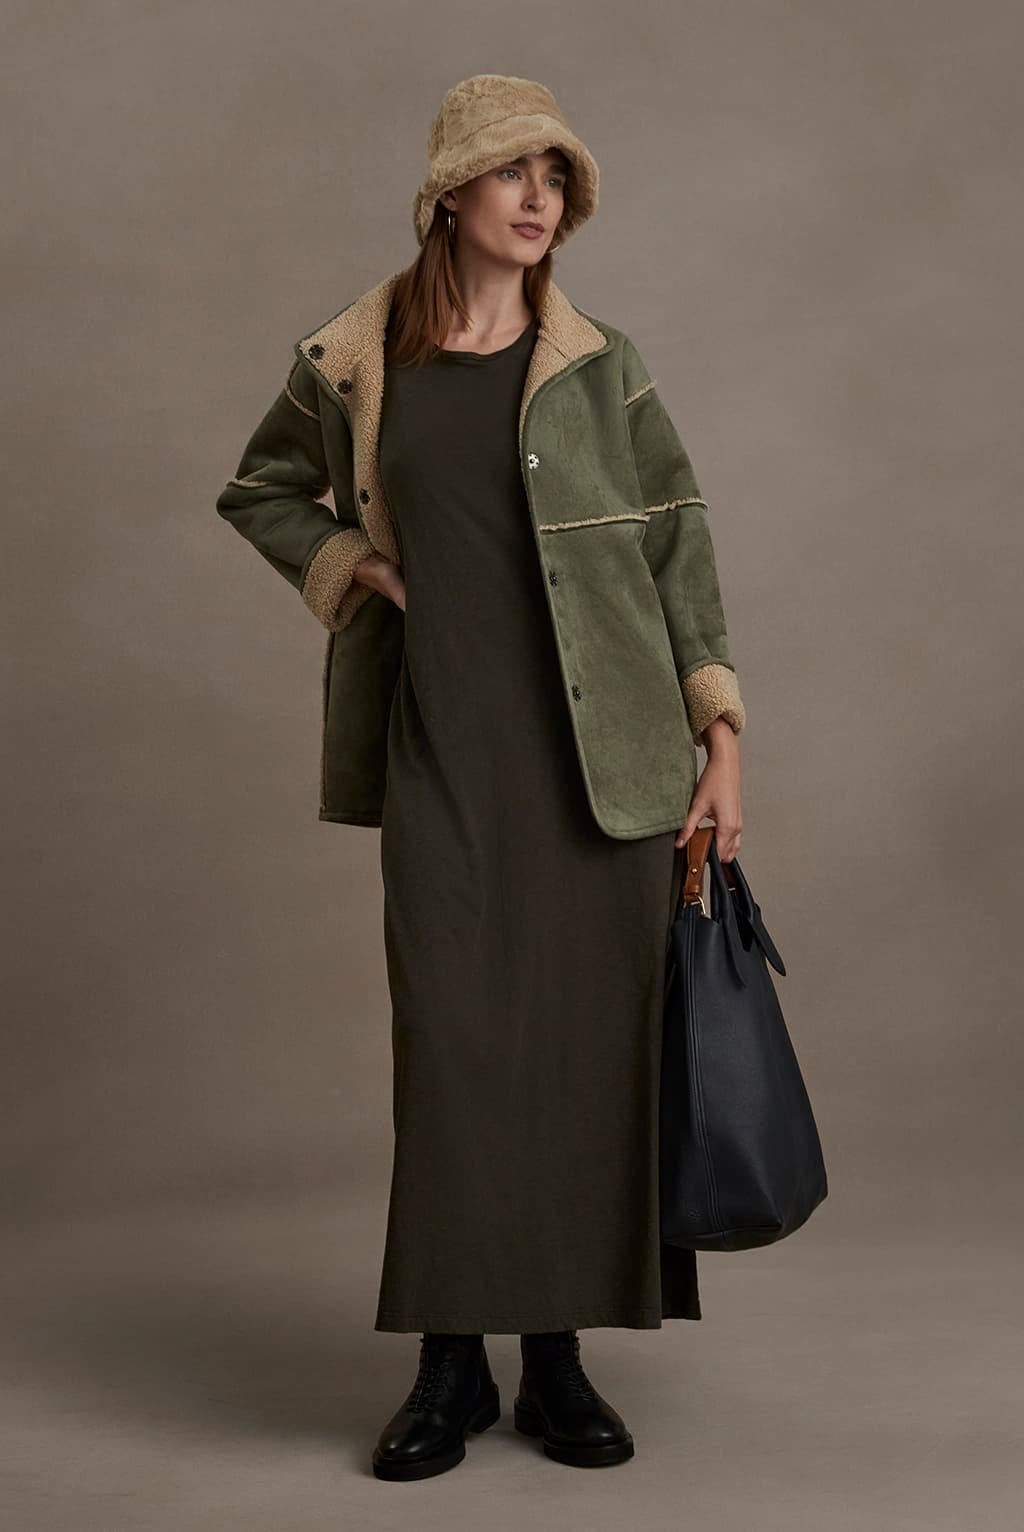 Model wearing the Albany Jacket over the Edith Dress